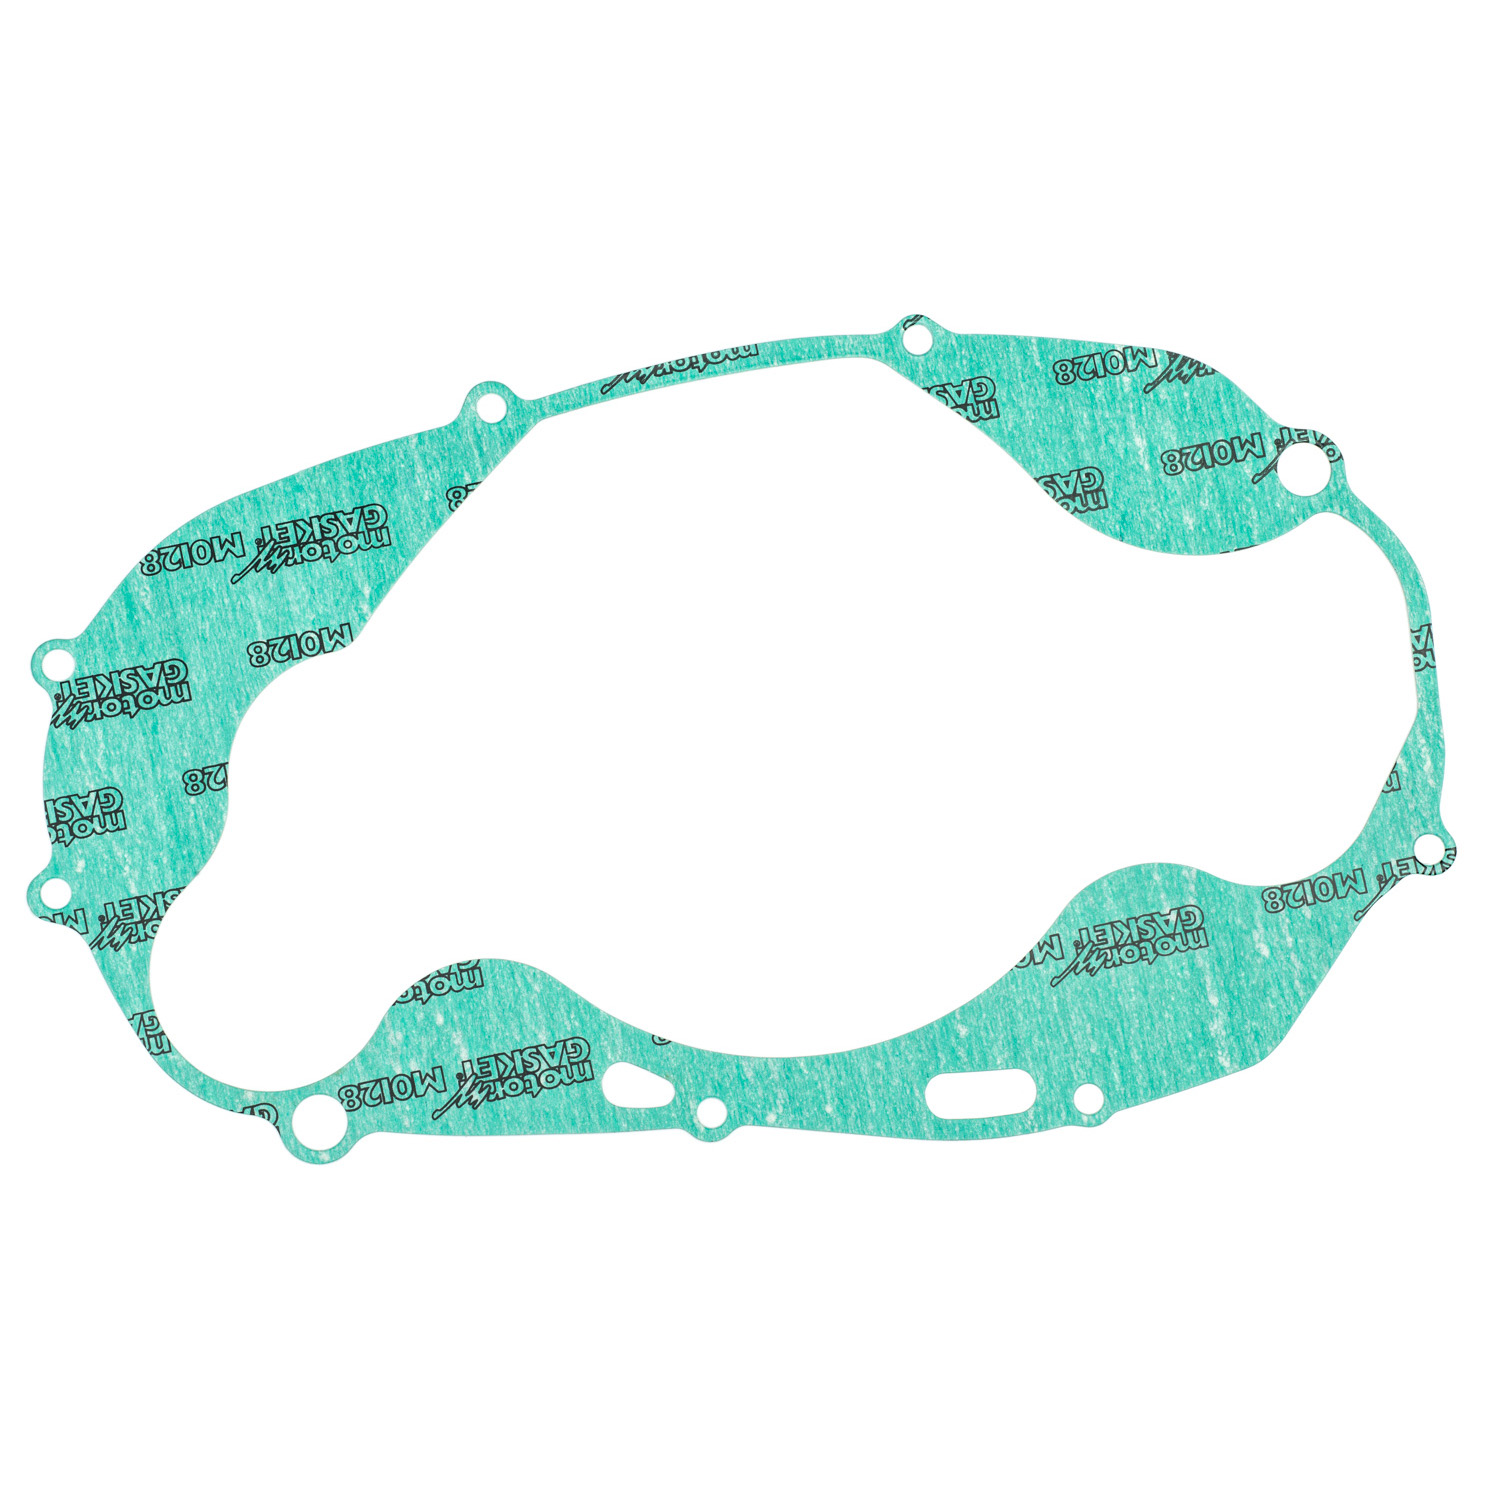 RD250F 1979 Clutch Cover Gasket